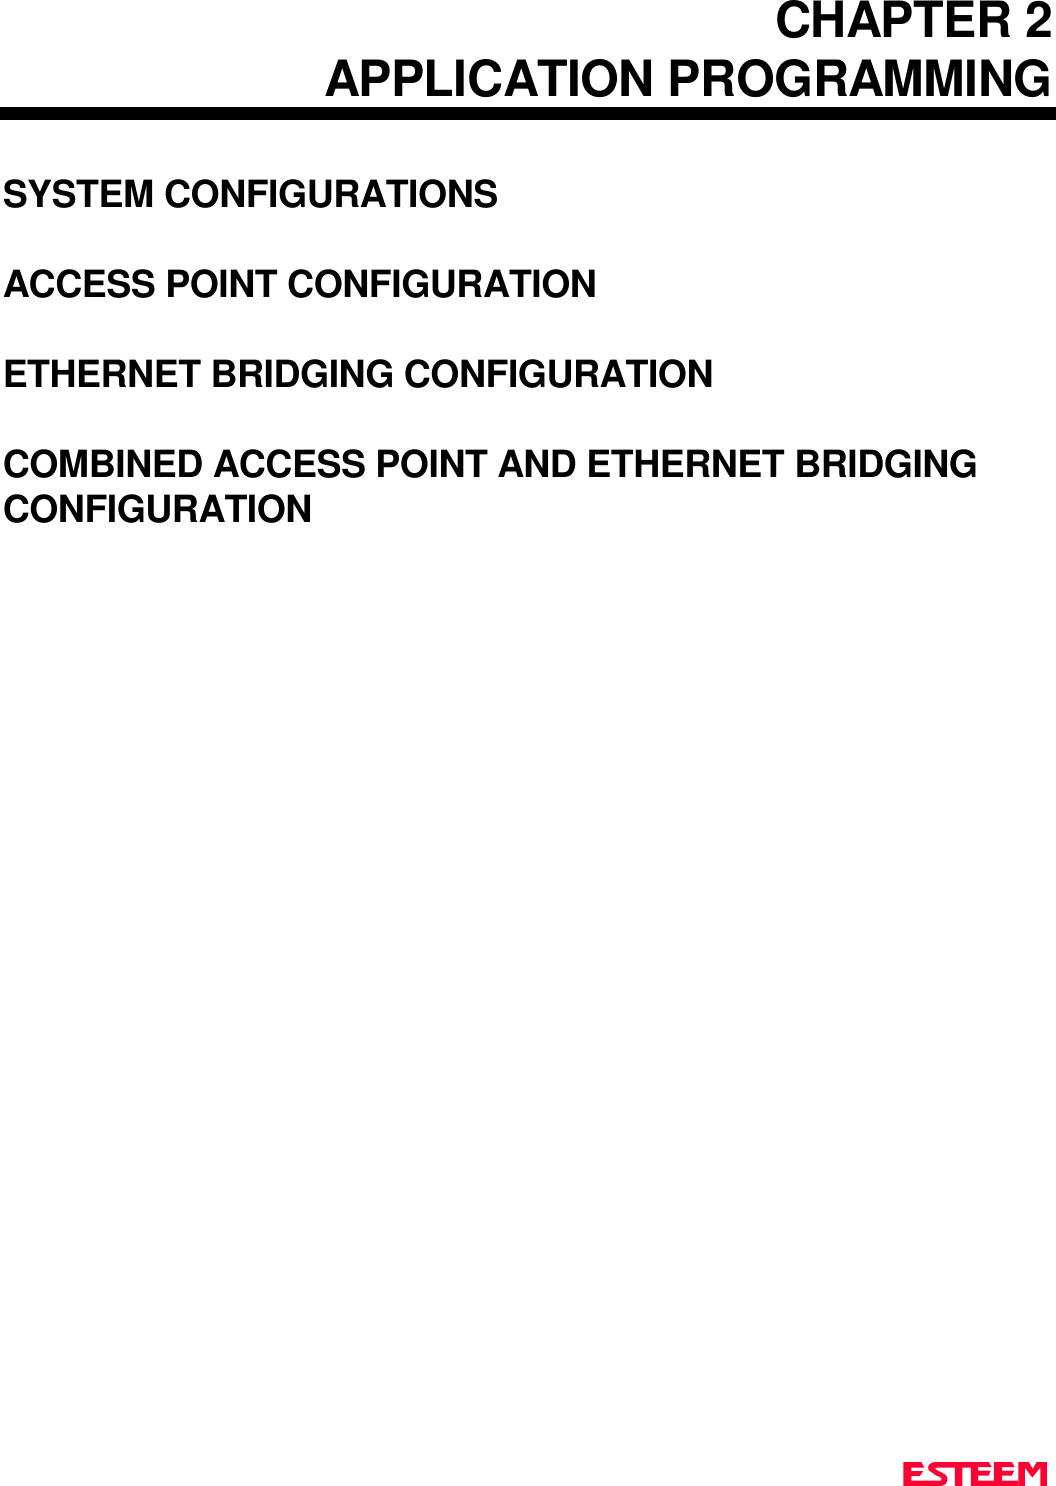 CHAPTER 2APPLICATION PROGRAMMINGSYSTEM CONFIGURATIONSACCESS POINT CONFIGURATIONETHERNET BRIDGING CONFIGURATIONCOMBINED ACCESS POINT AND ETHERNET BRIDGINGCONFIGURATION